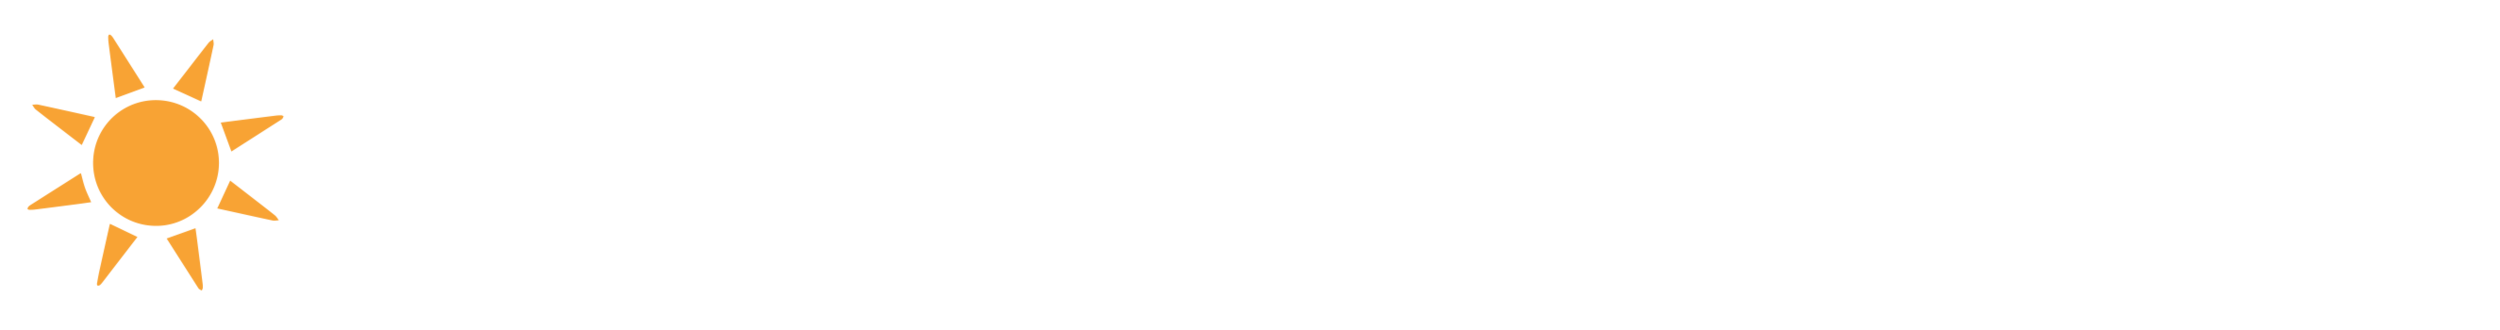 Campbell_s Logo.png